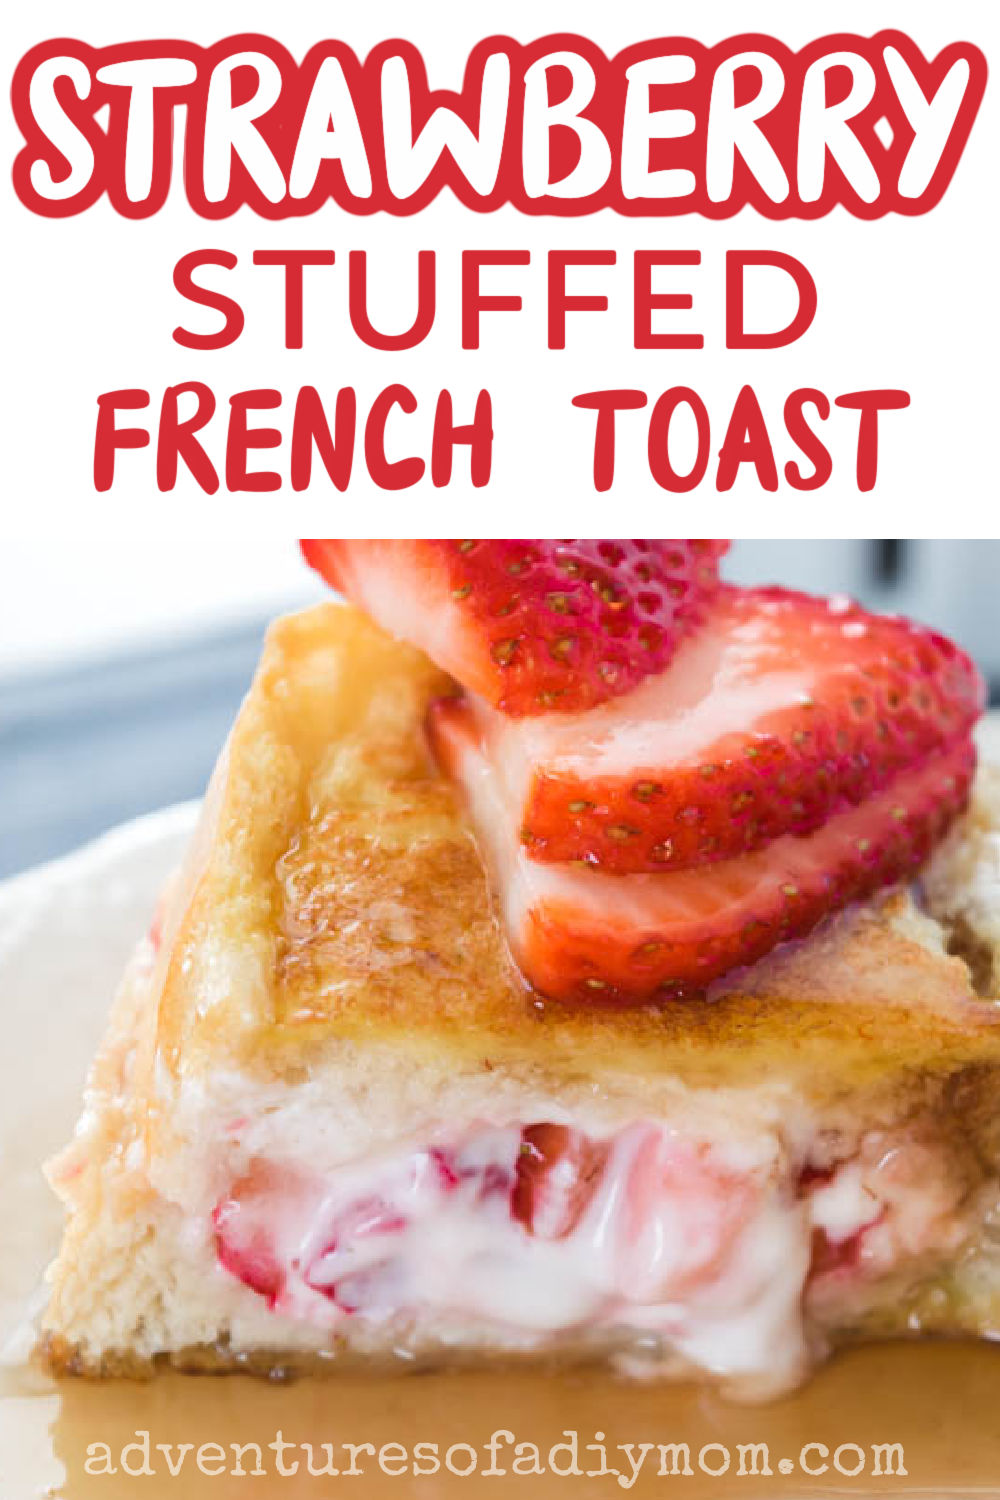 Strawberry Stuffed French Toast - Adventures of a DIY Mom